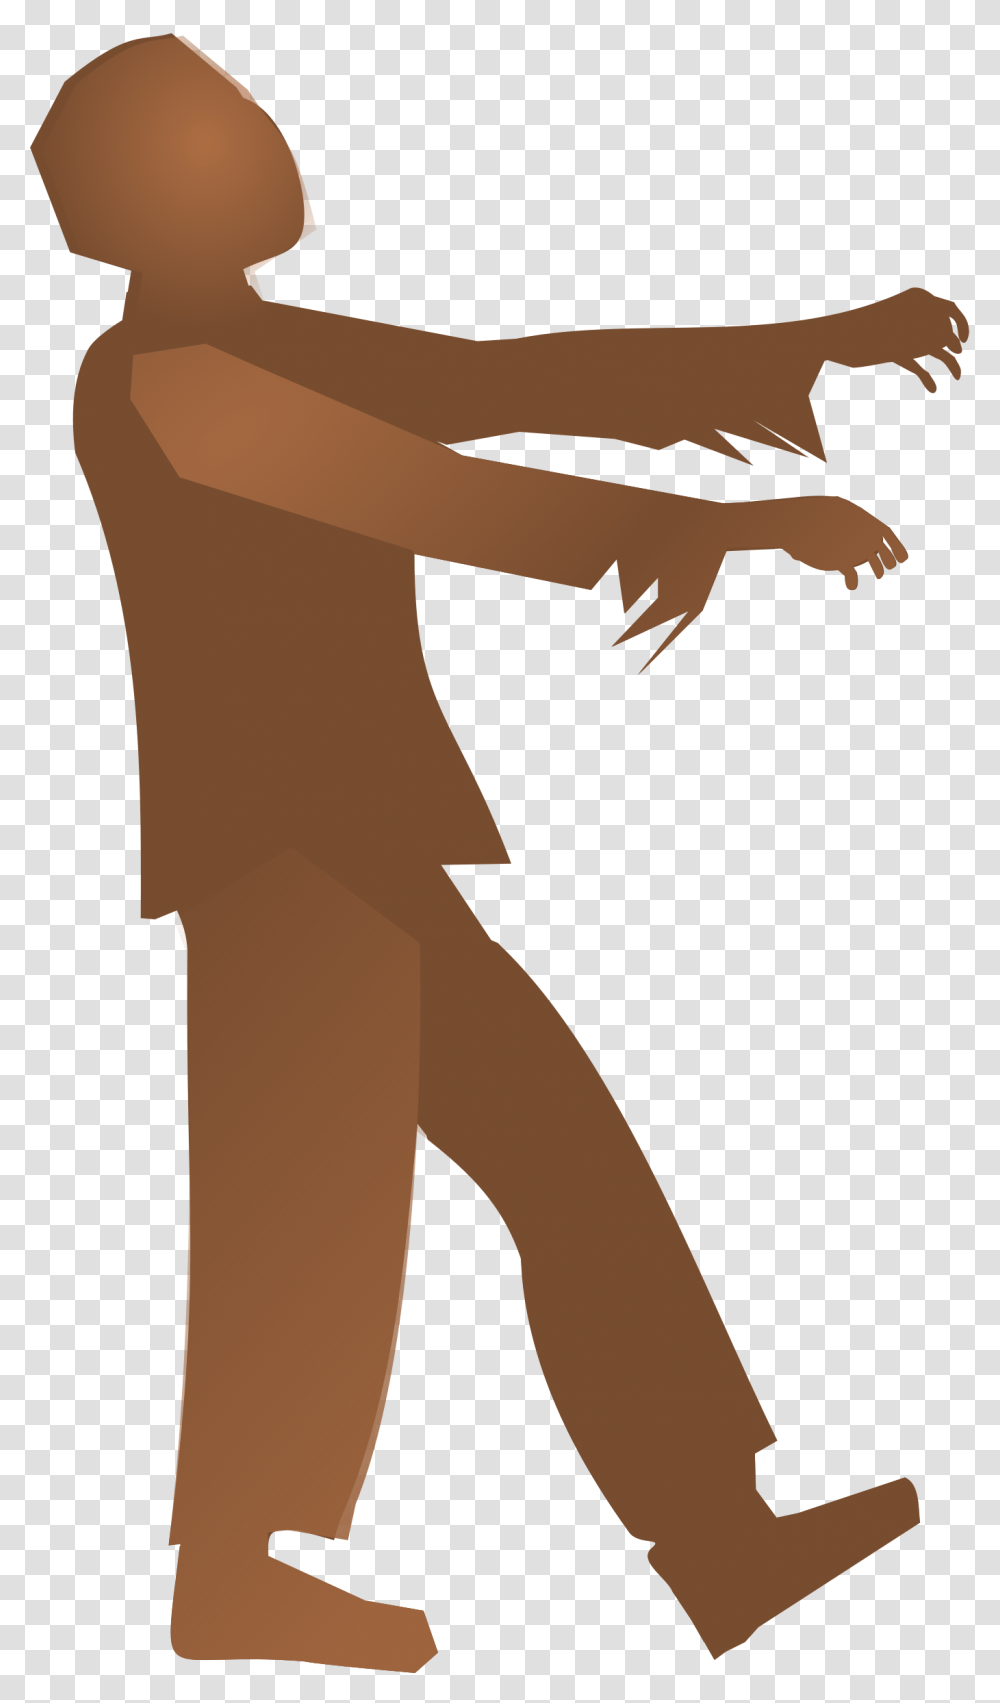 Zombie Silhouette 2 Clip Arts Simple Zombie Silhouette, Cross, Arm, Hand, Standing Transparent Png